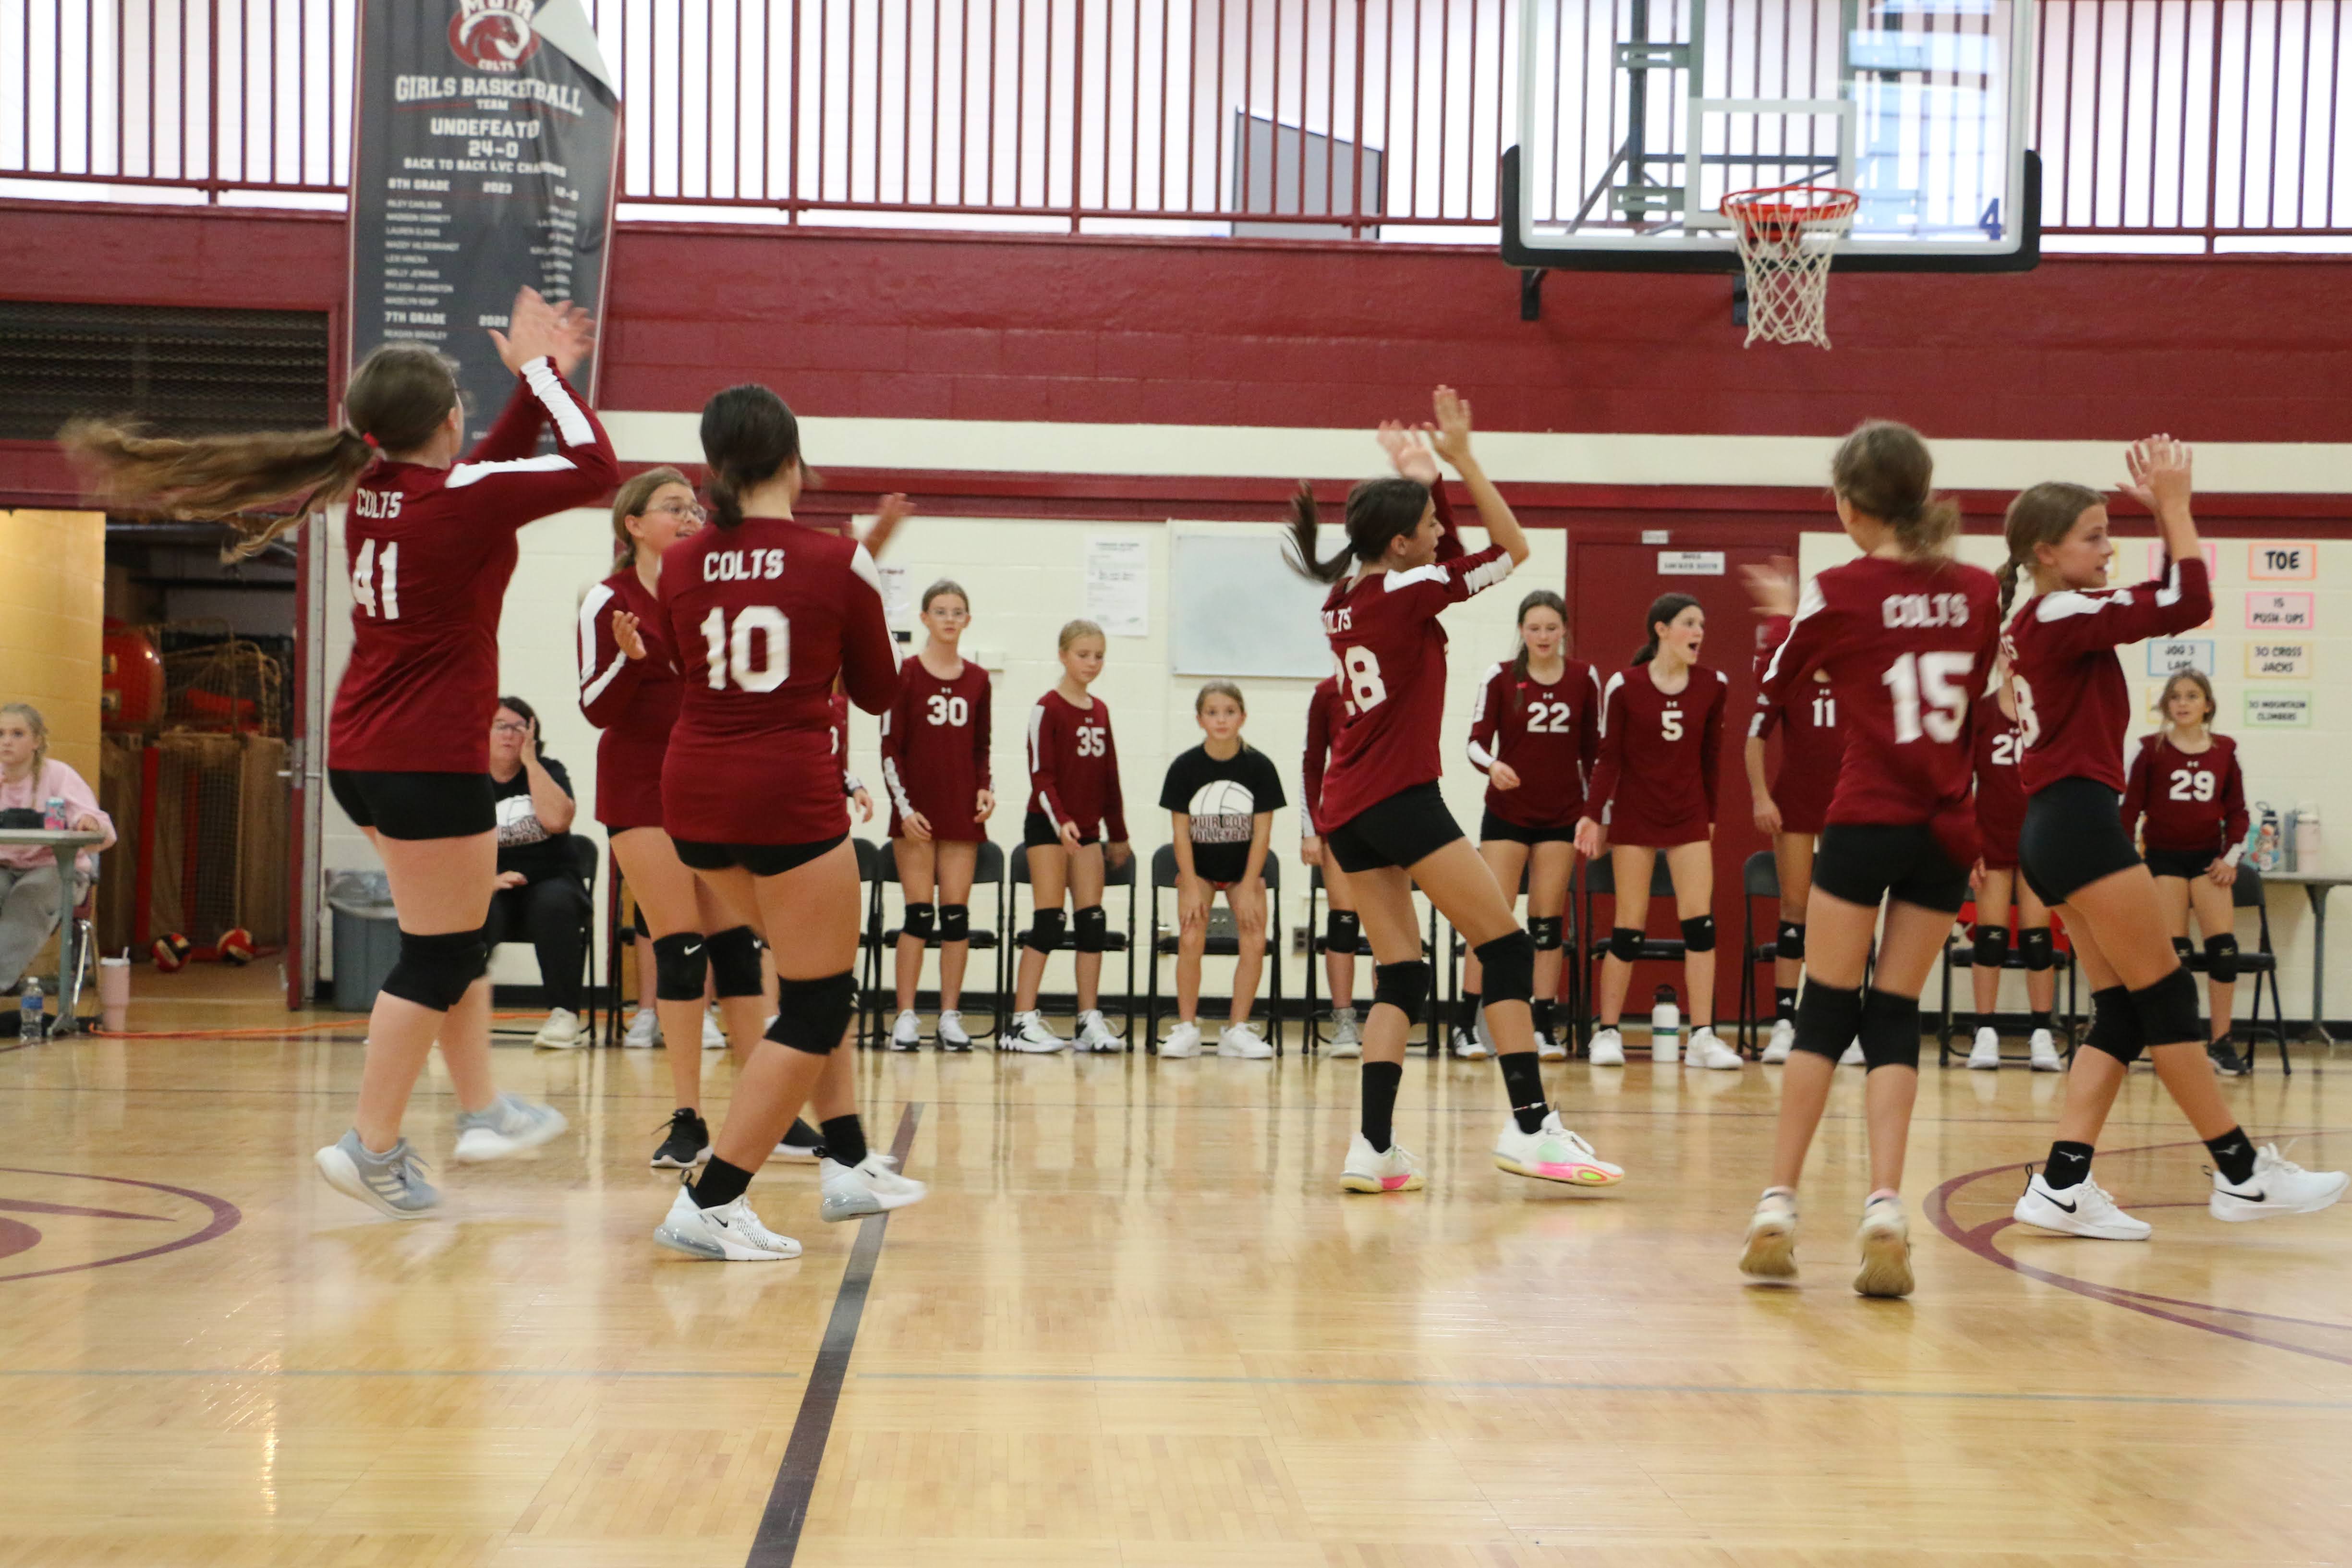 7th grade Girls Volleyball cheering for a great shot